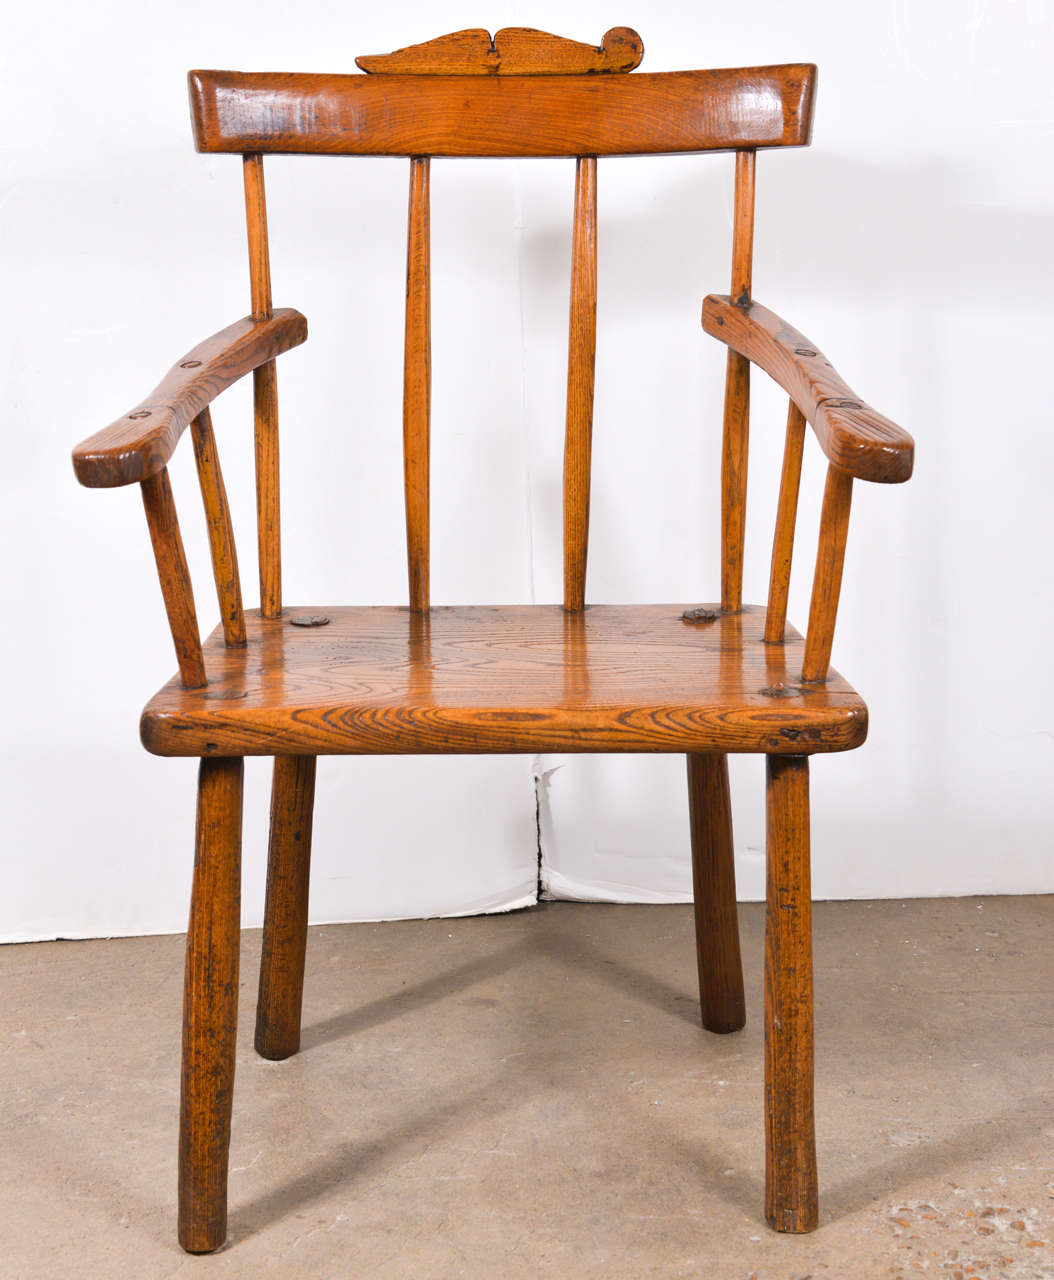 18th century hedge row chair in elm from England. Has the crest detail on top. Beautiful patina, circa 1760.